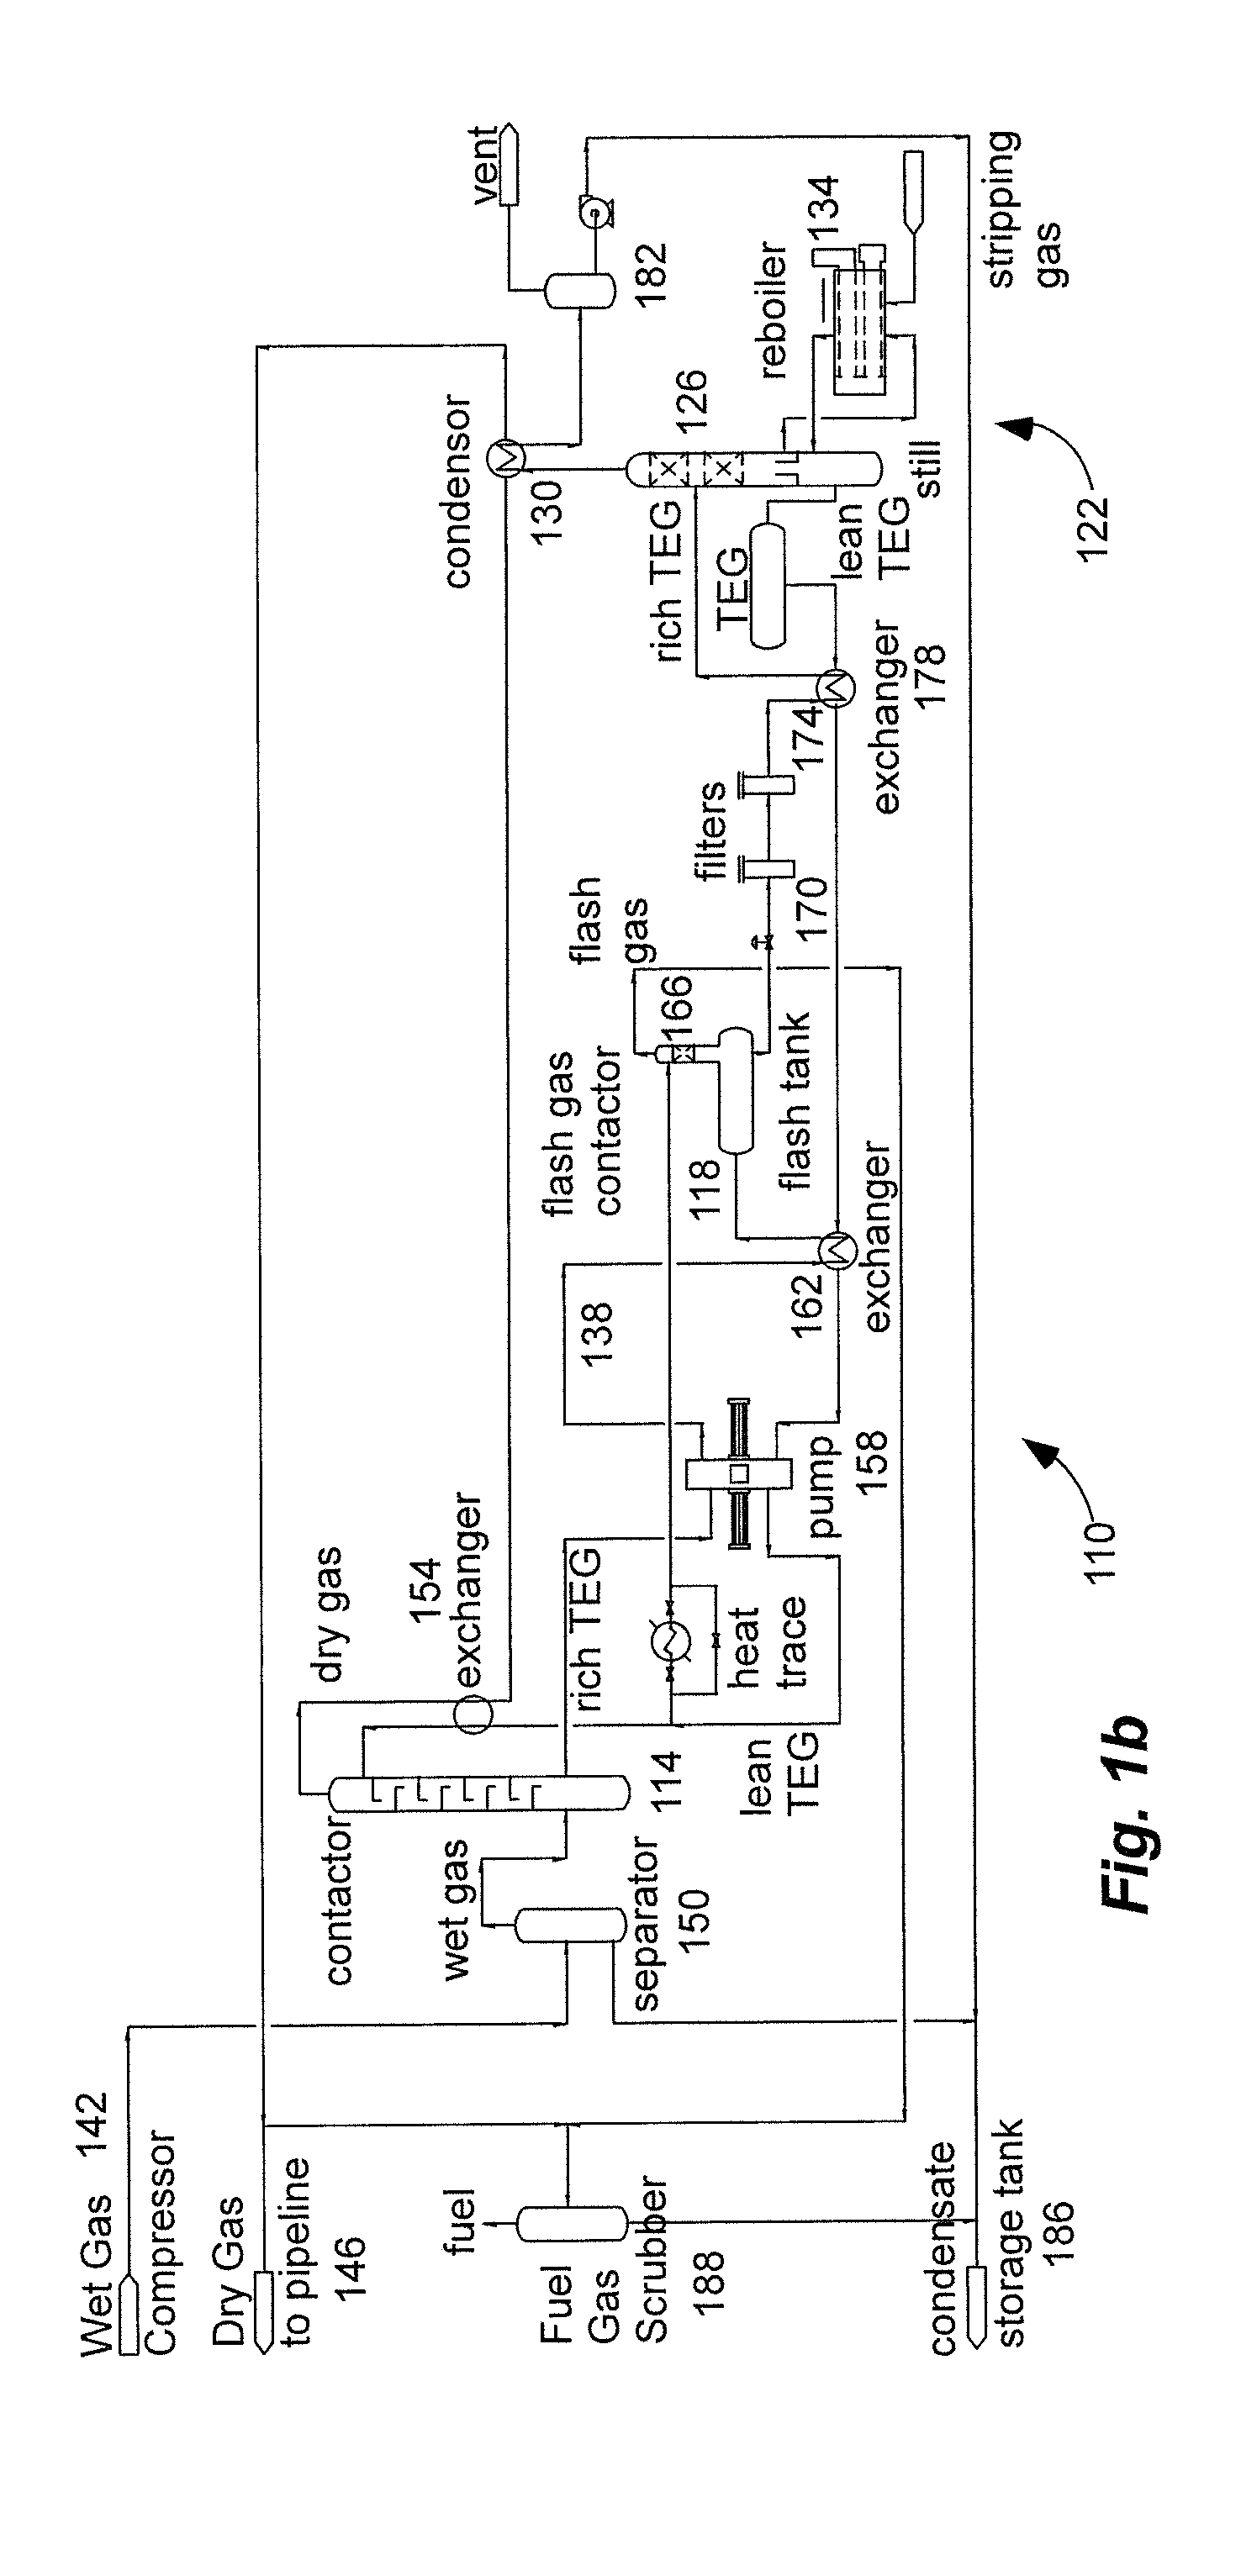 System and method for natural gas dehydration